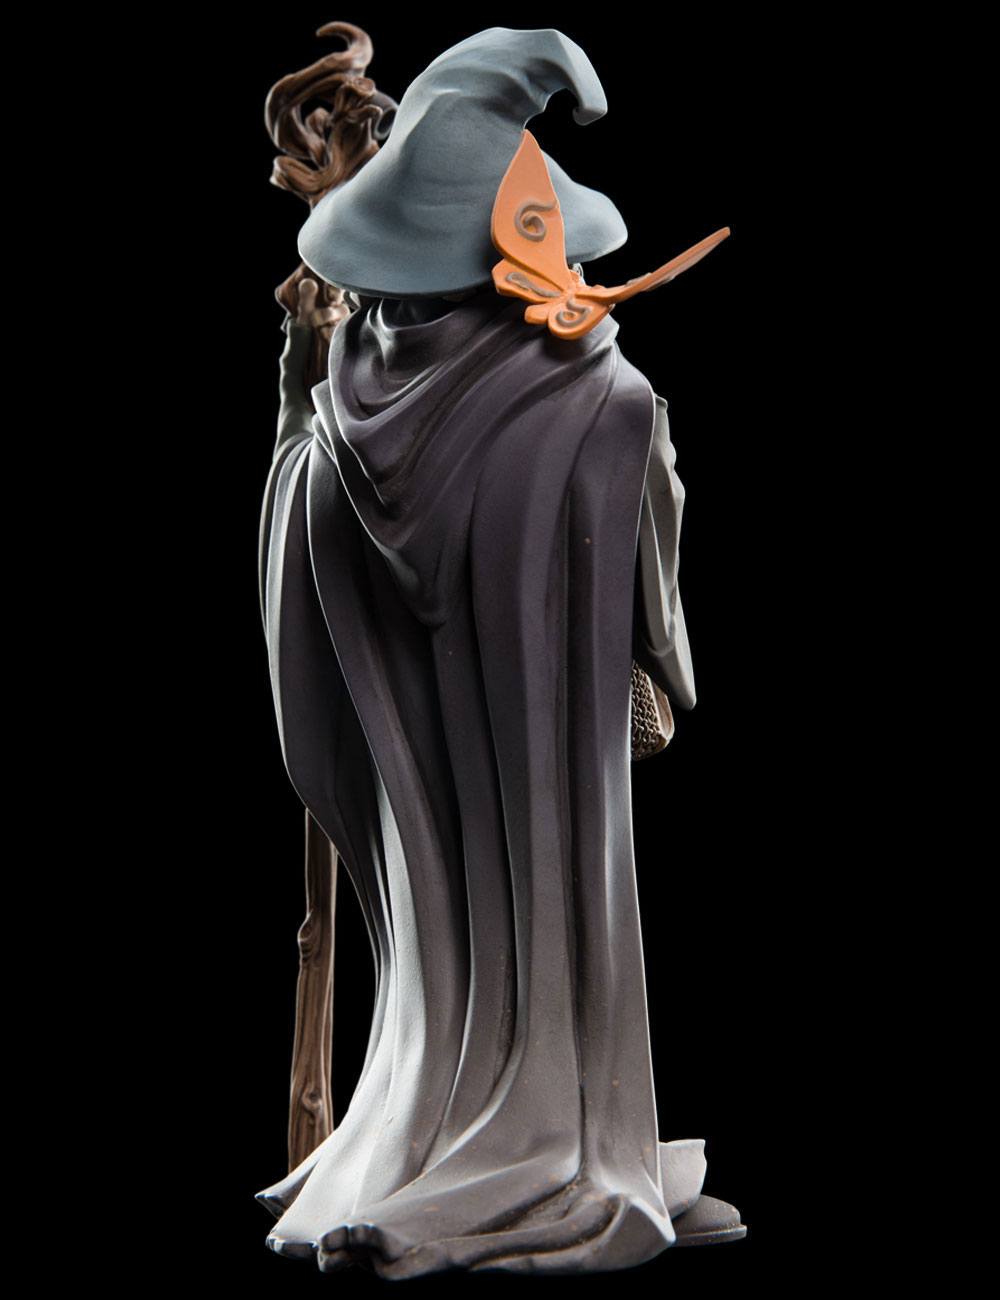 Lord of the Rings Mini Epics Vinyl Figure Gandalf The Grey 18cm - Loaded Dice Barry Vale of Glamorgan CF64 3HD